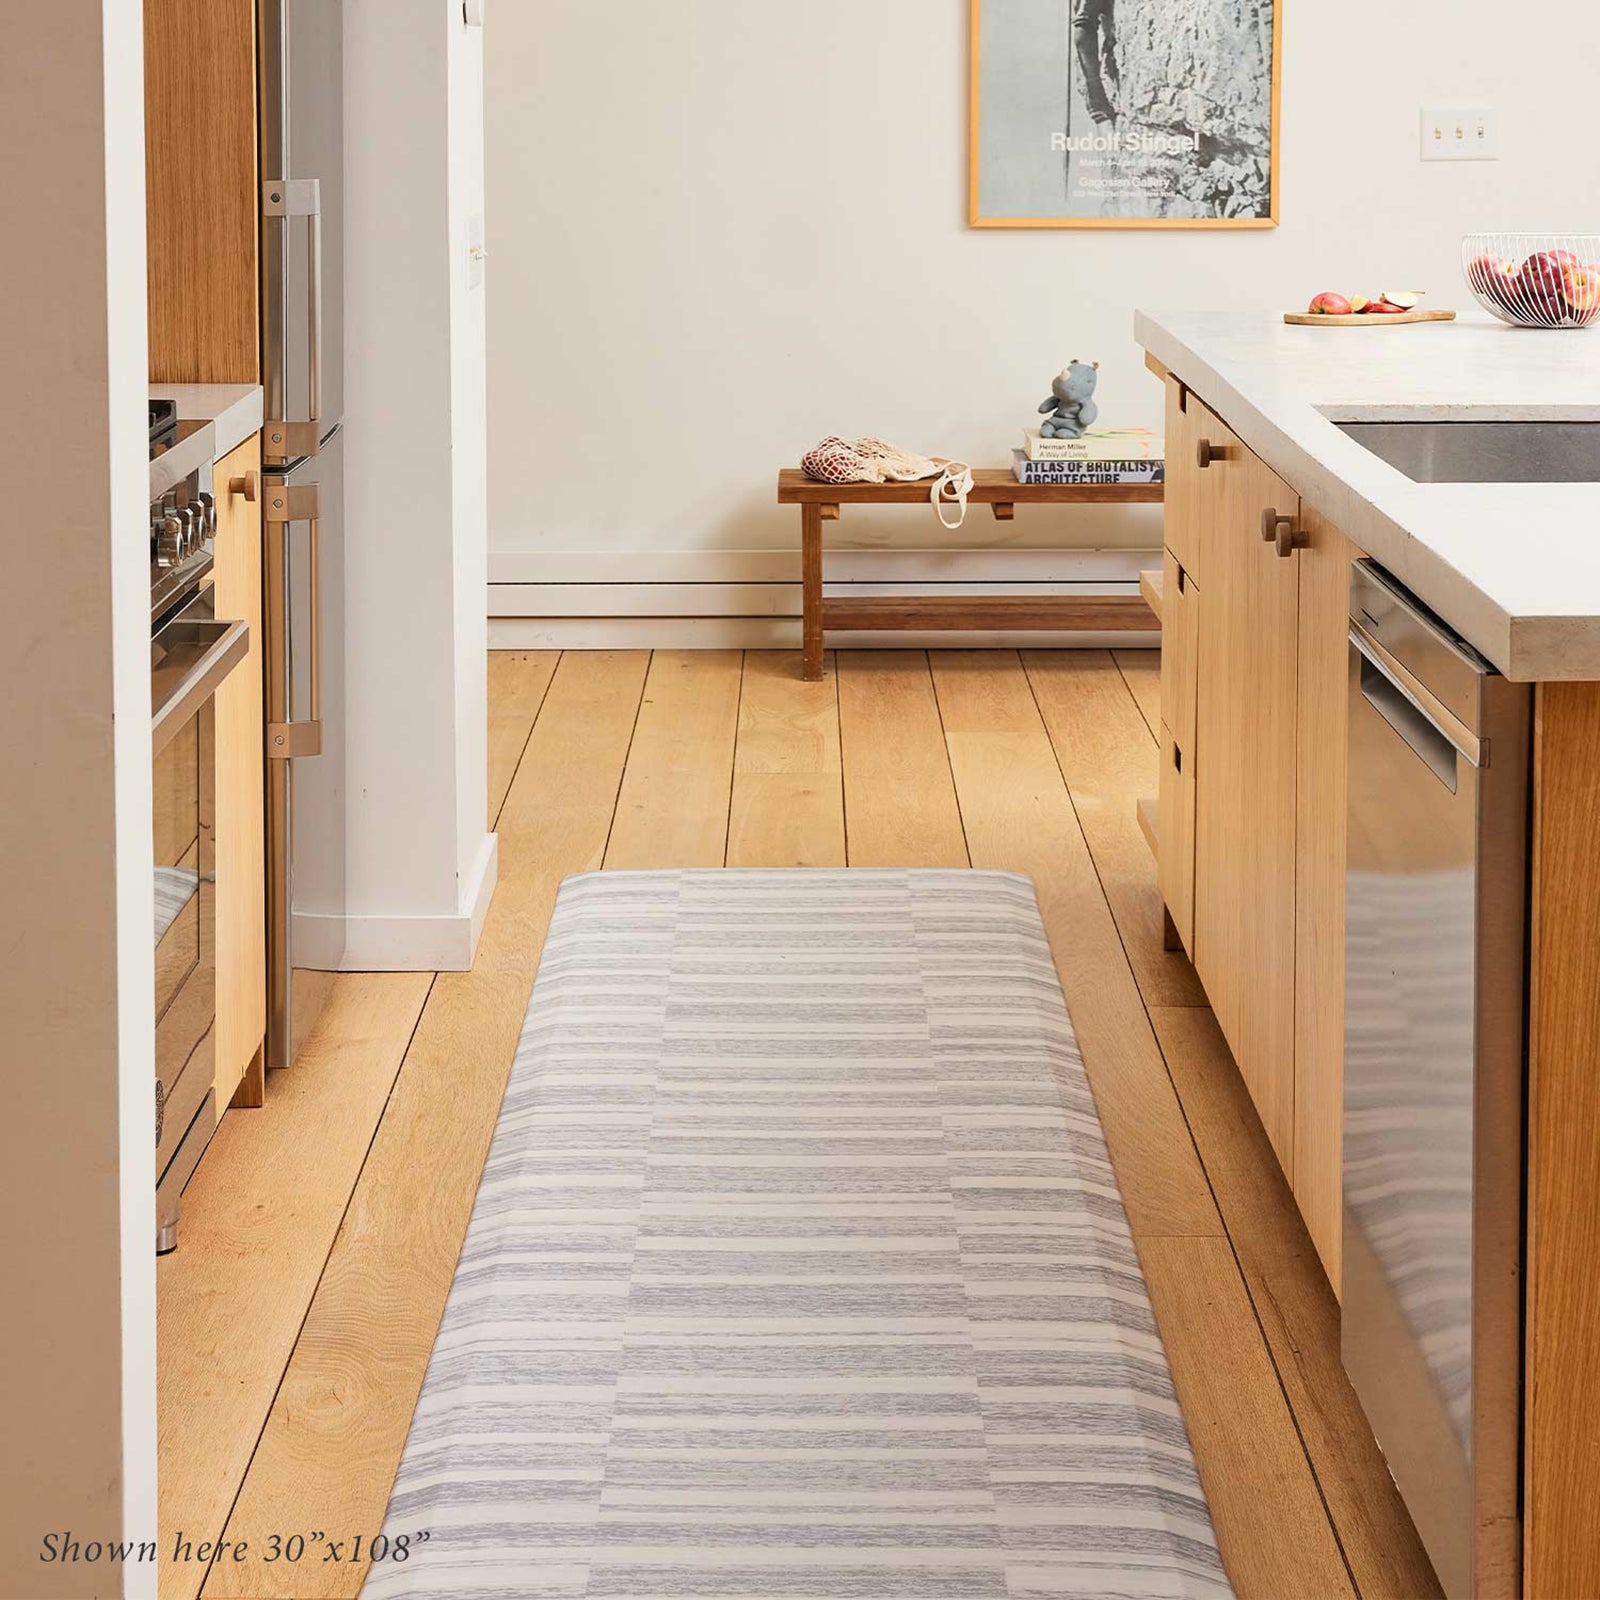 Sutton stripe heather gray and white inverted stripe standing mat shown in light wood tone kitchen with size 30x108 on the floor between the counter and island